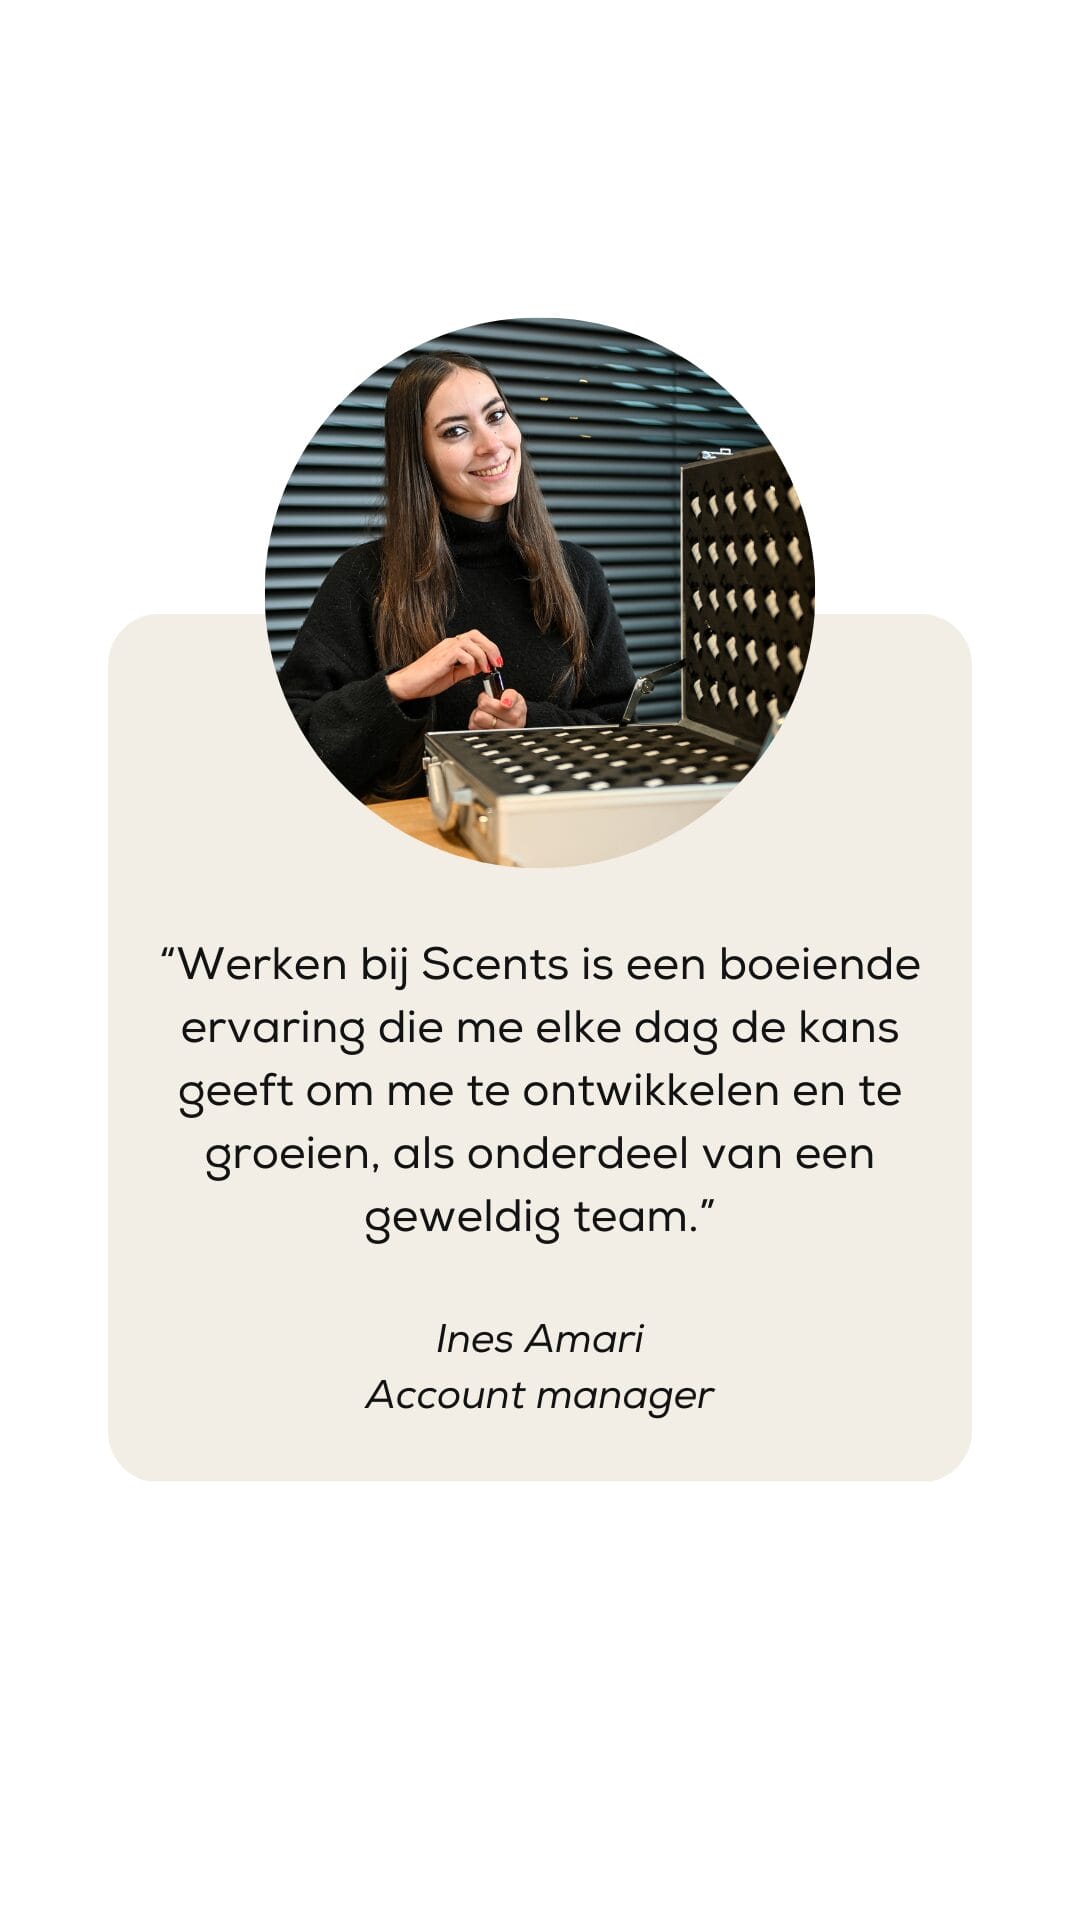 Account manager Ines